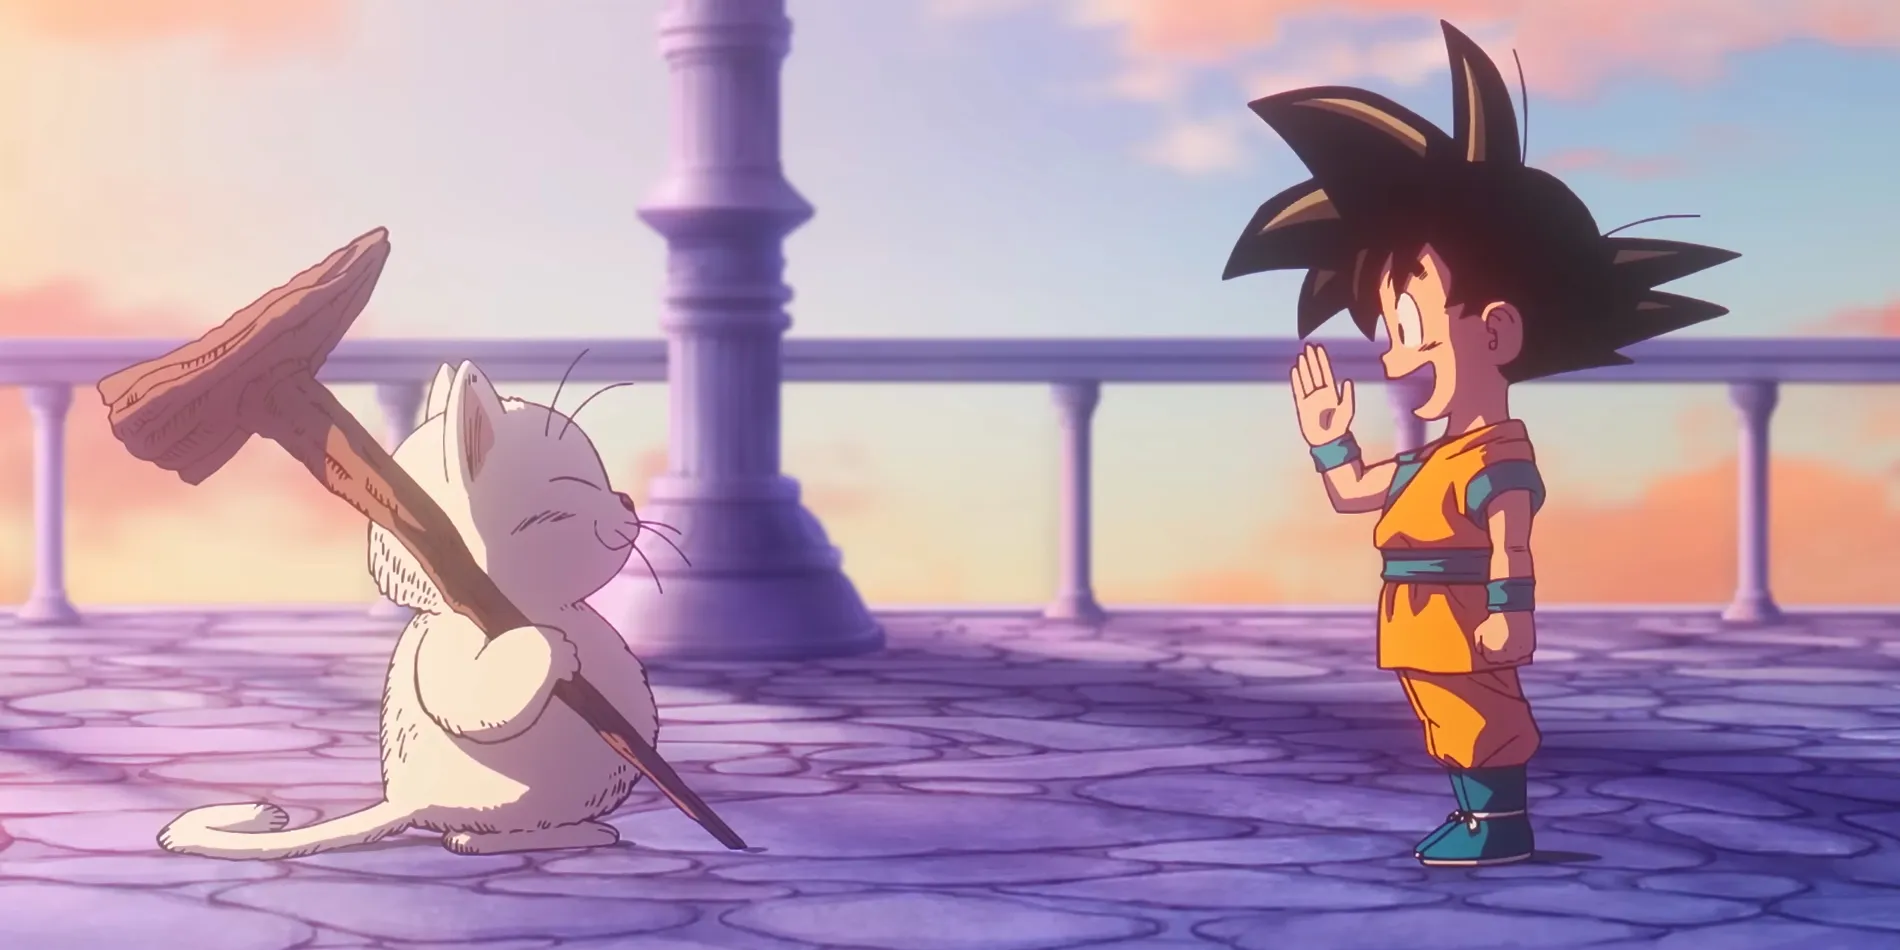 Exciting First Look Dragon Ball Daima Brings Back Kid Goku in a Fresh Adventure for 2024--